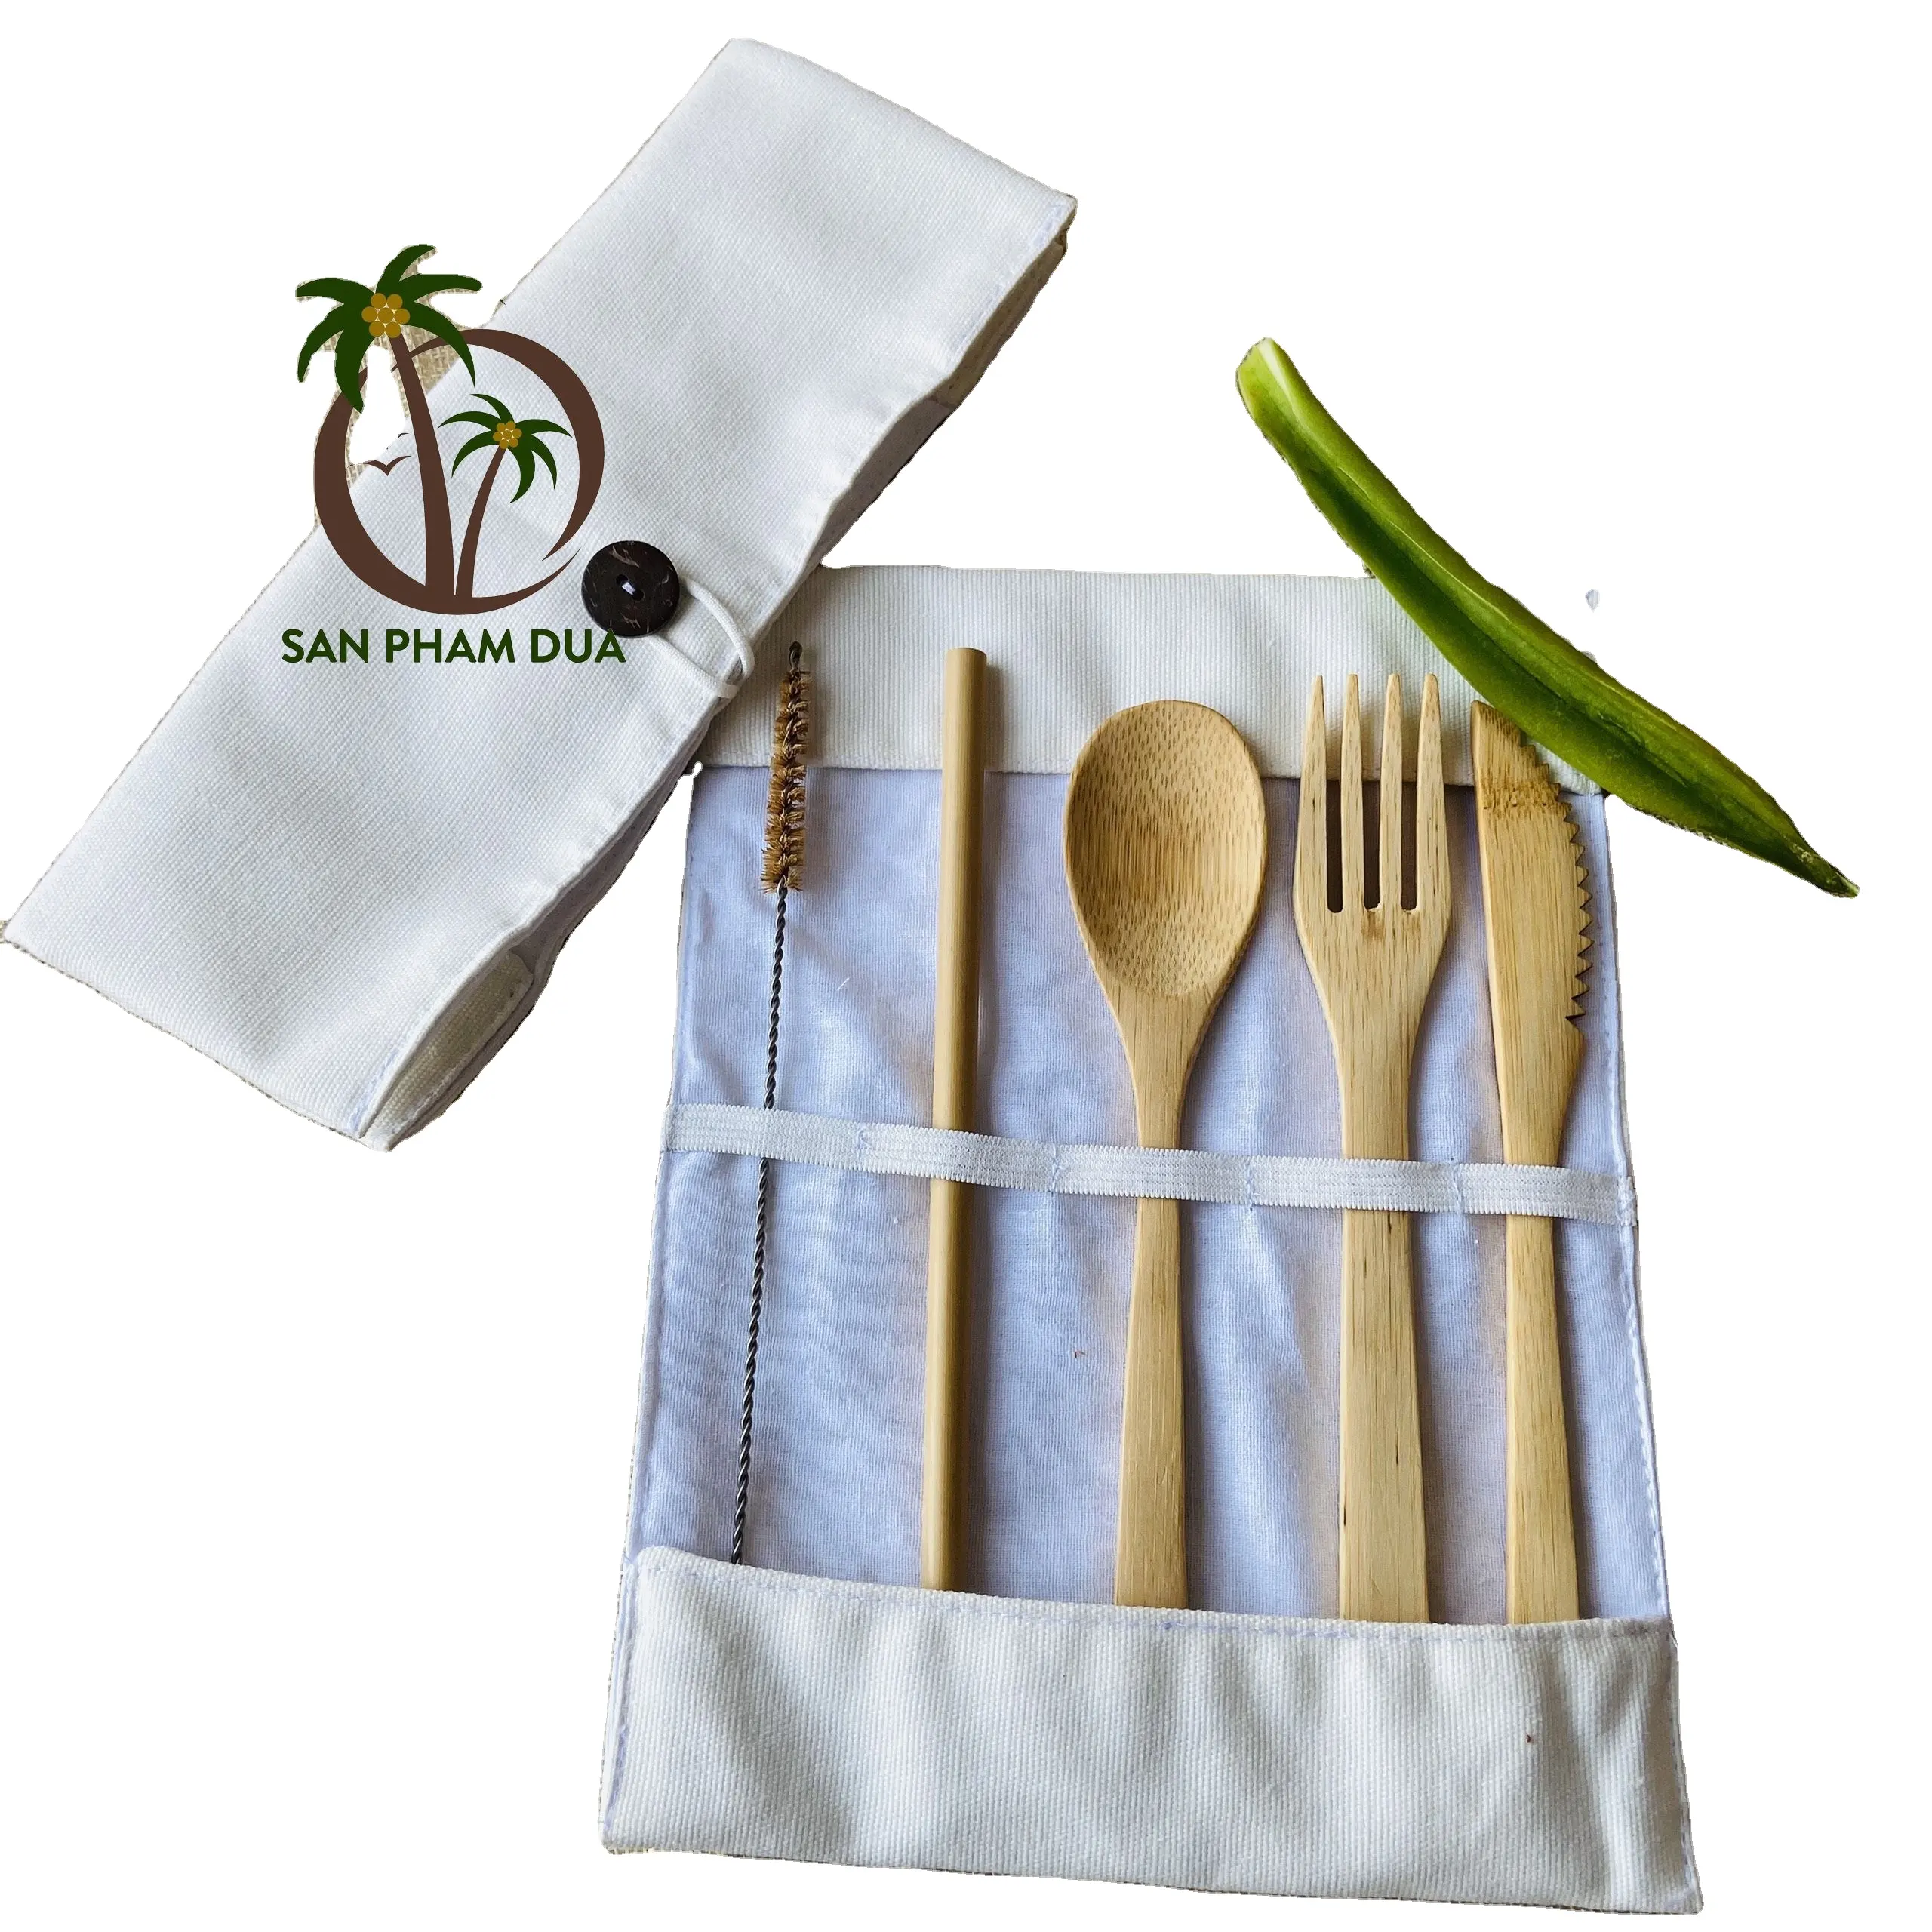 WHOLESALE BAMBOO CUTLERY INCLUDE BAMBOO SPOON FORK KNIFE STRAW CHOPSTICKS COCO - ECO VIETNAM